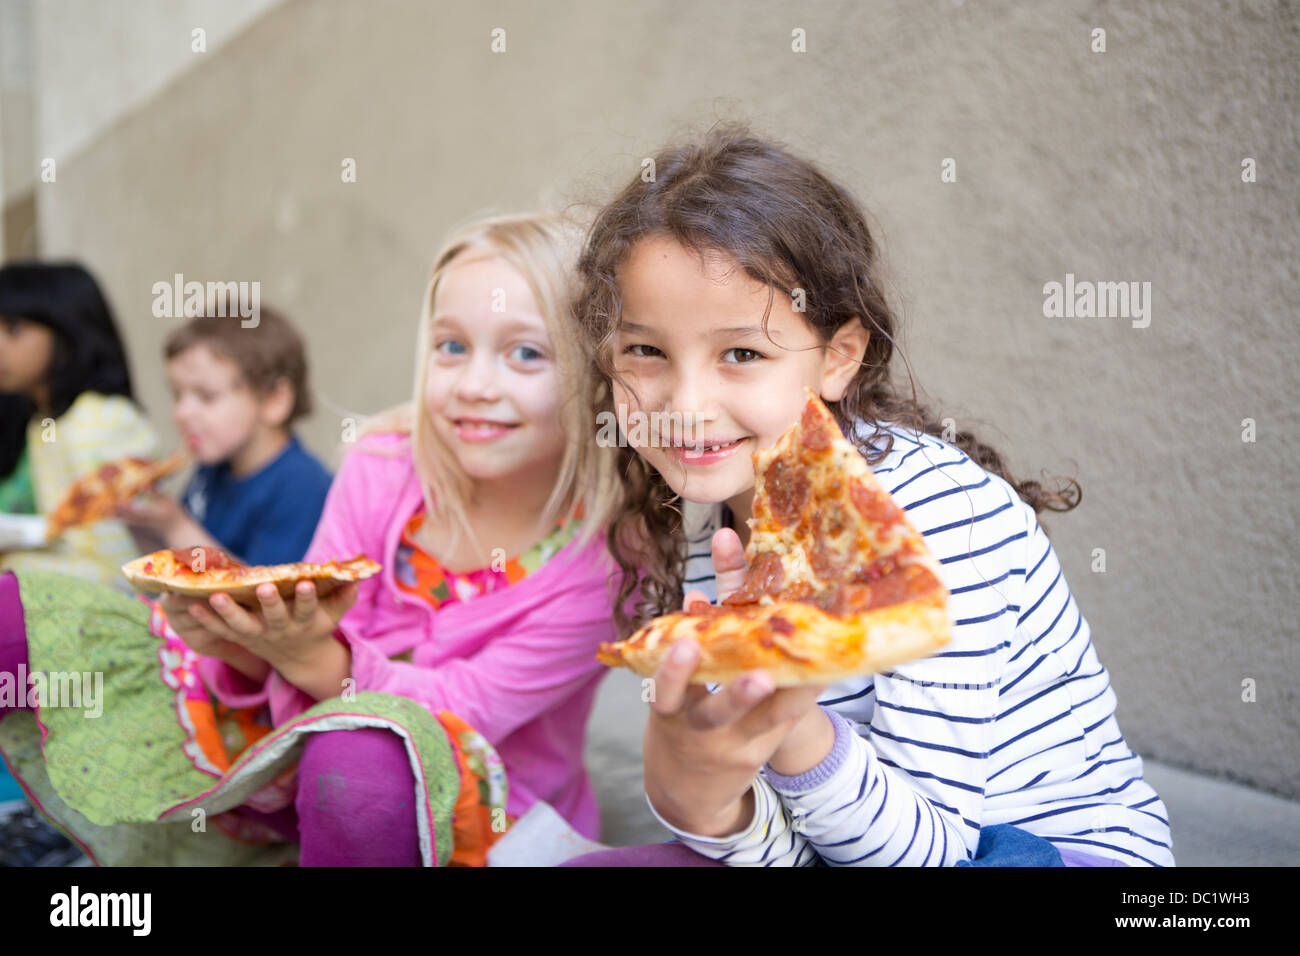 Small group of children eating pizza outdoors Stock Photo